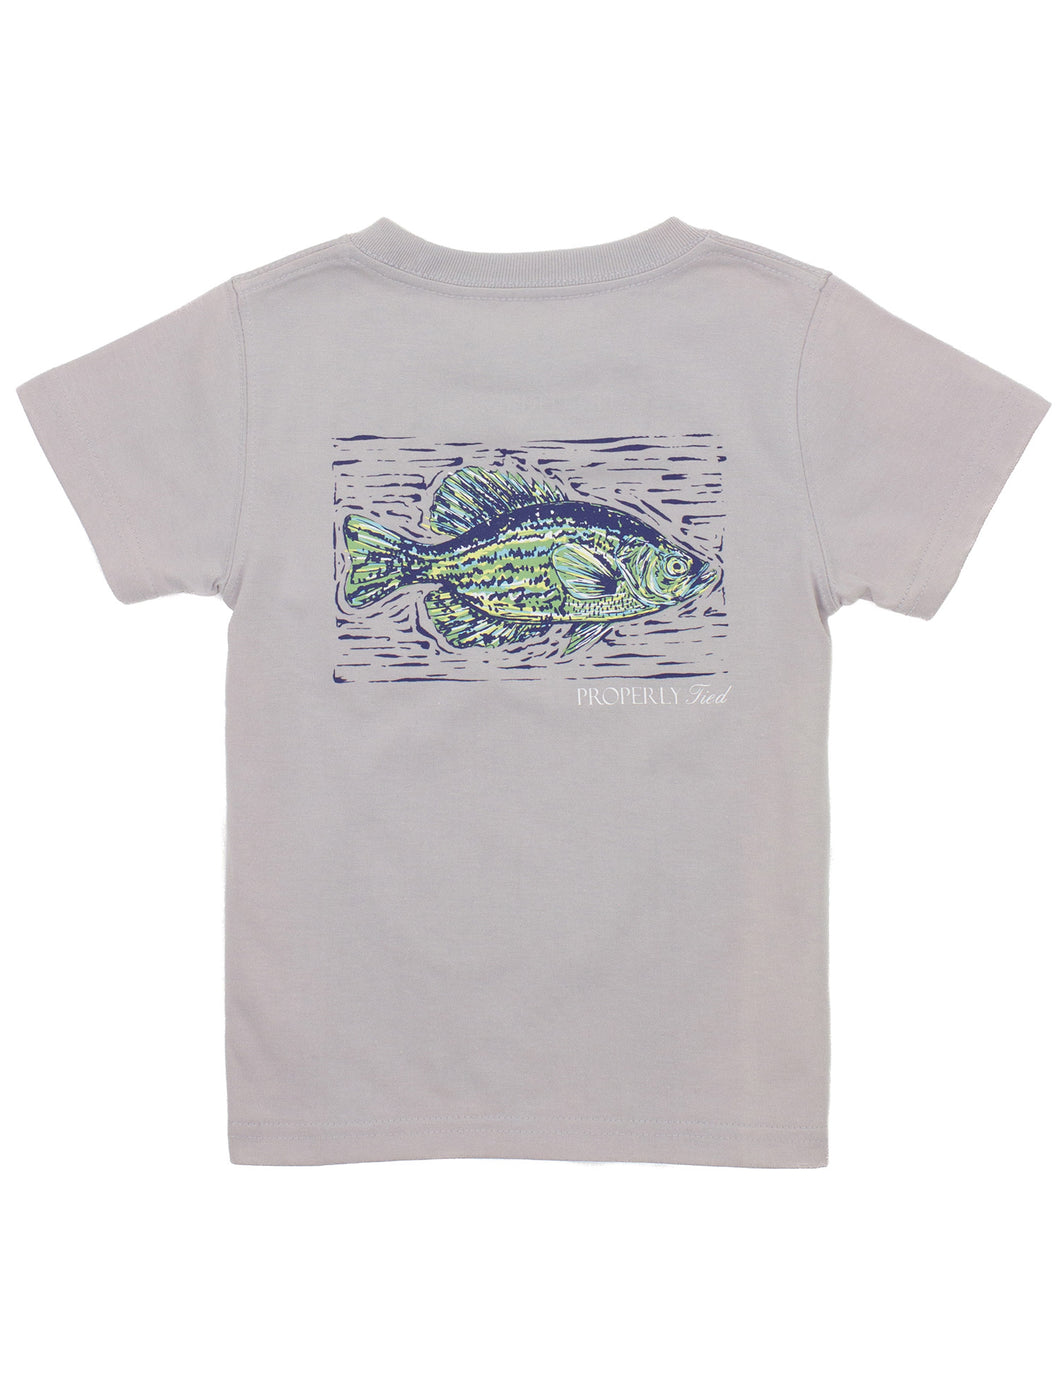 Boys Crappie Tee Properly Tied